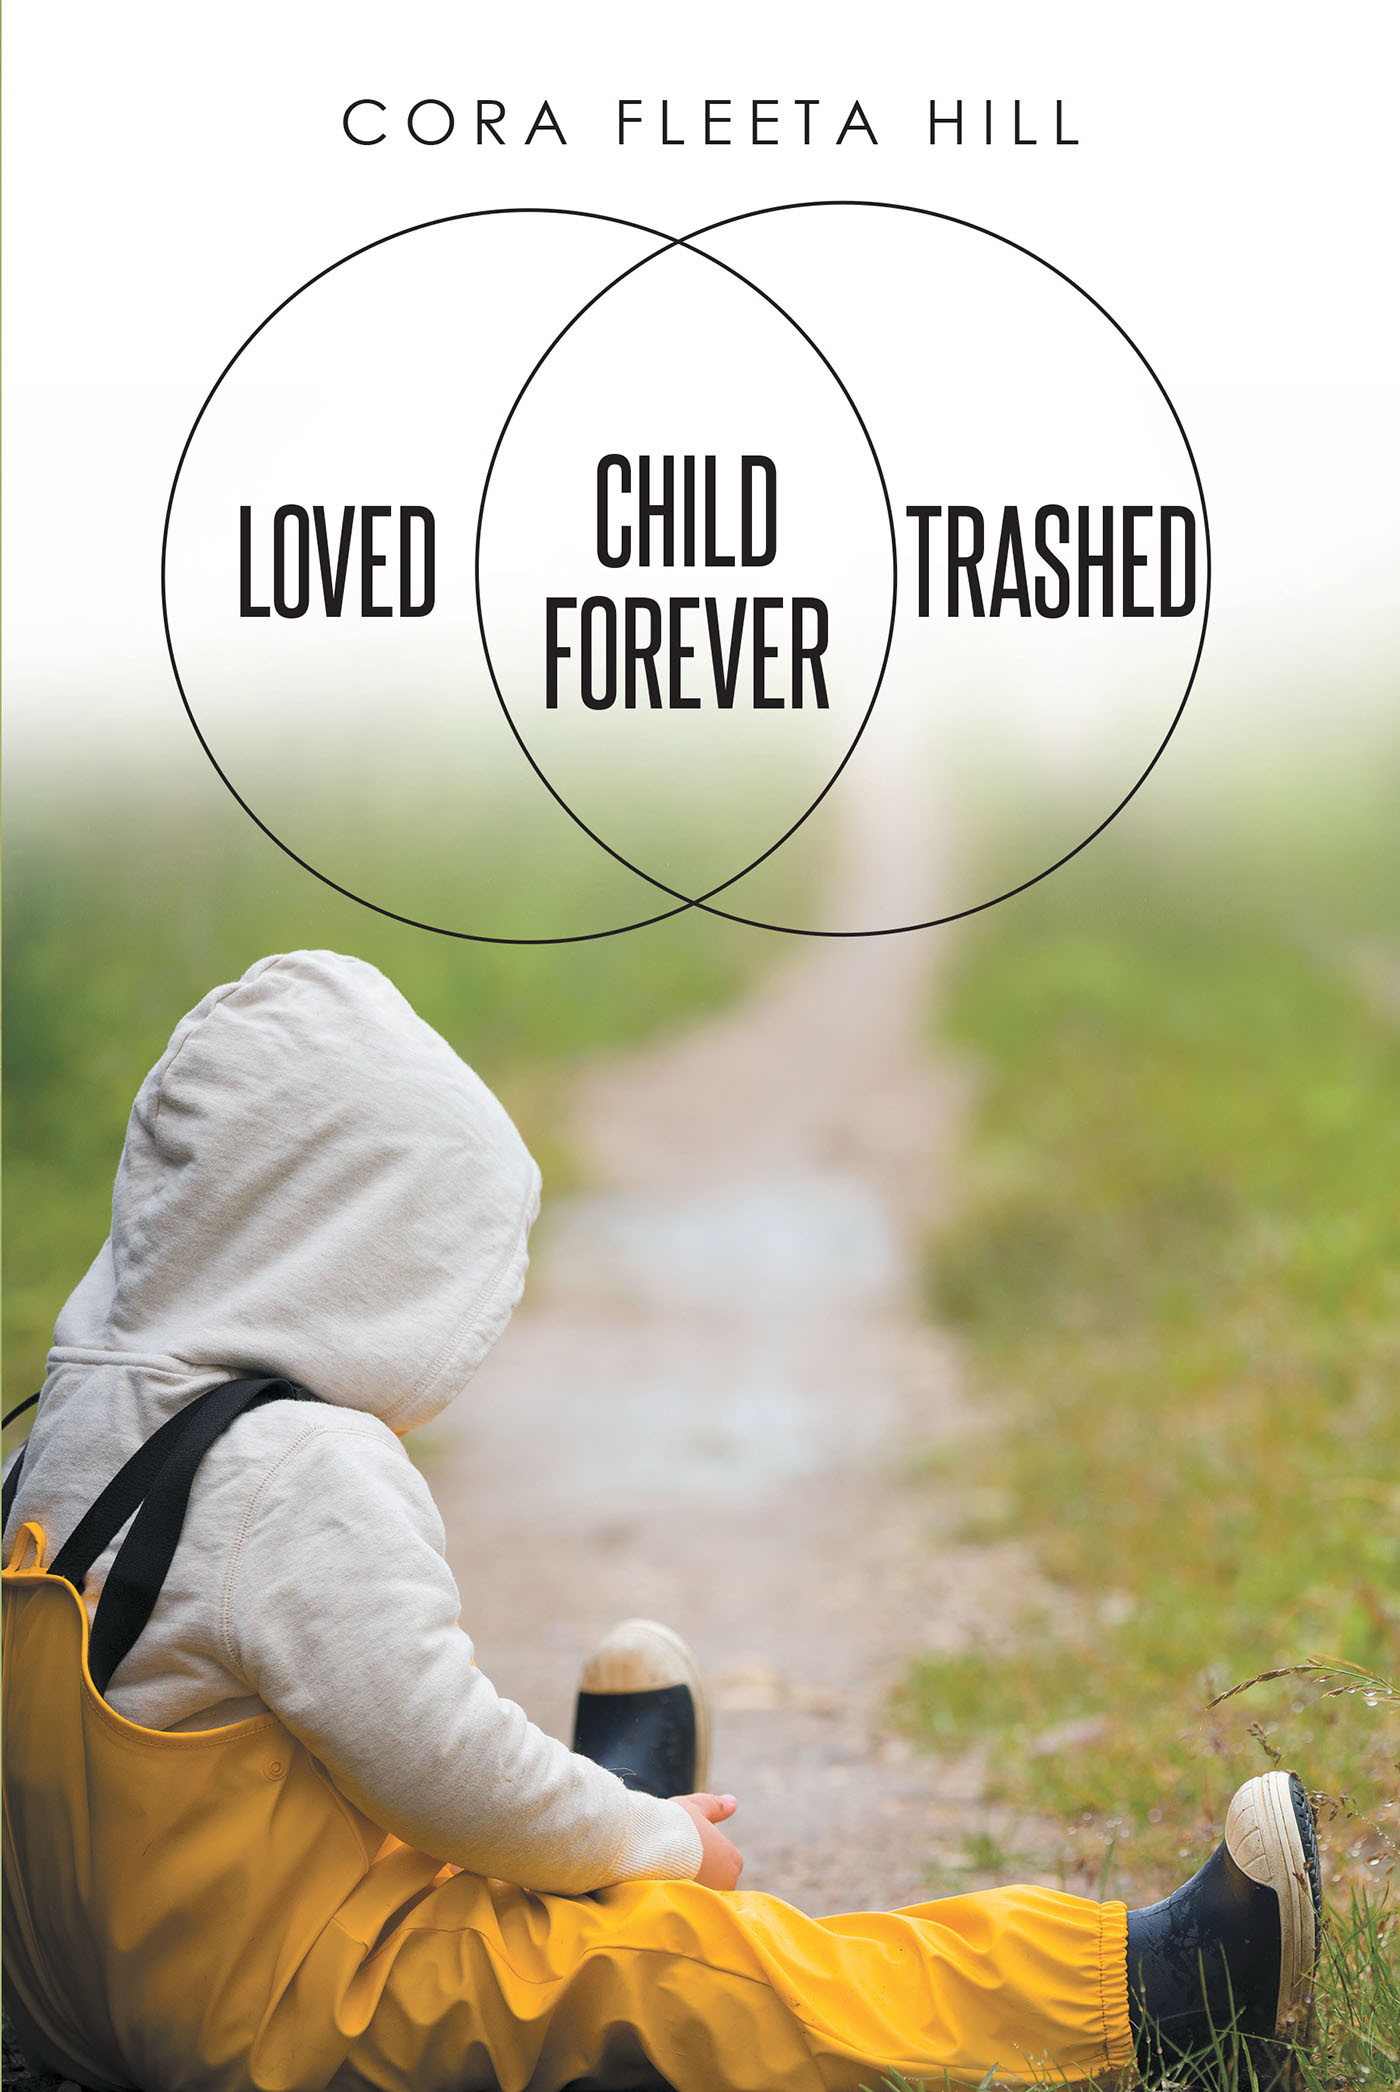 Author Cora Fleeta Hill’s New Book, "Loved Child Forever Trashed," Tells the Tragic Story of How the Author’s Granddaughter Was Abused and Destroyed by Her Mother